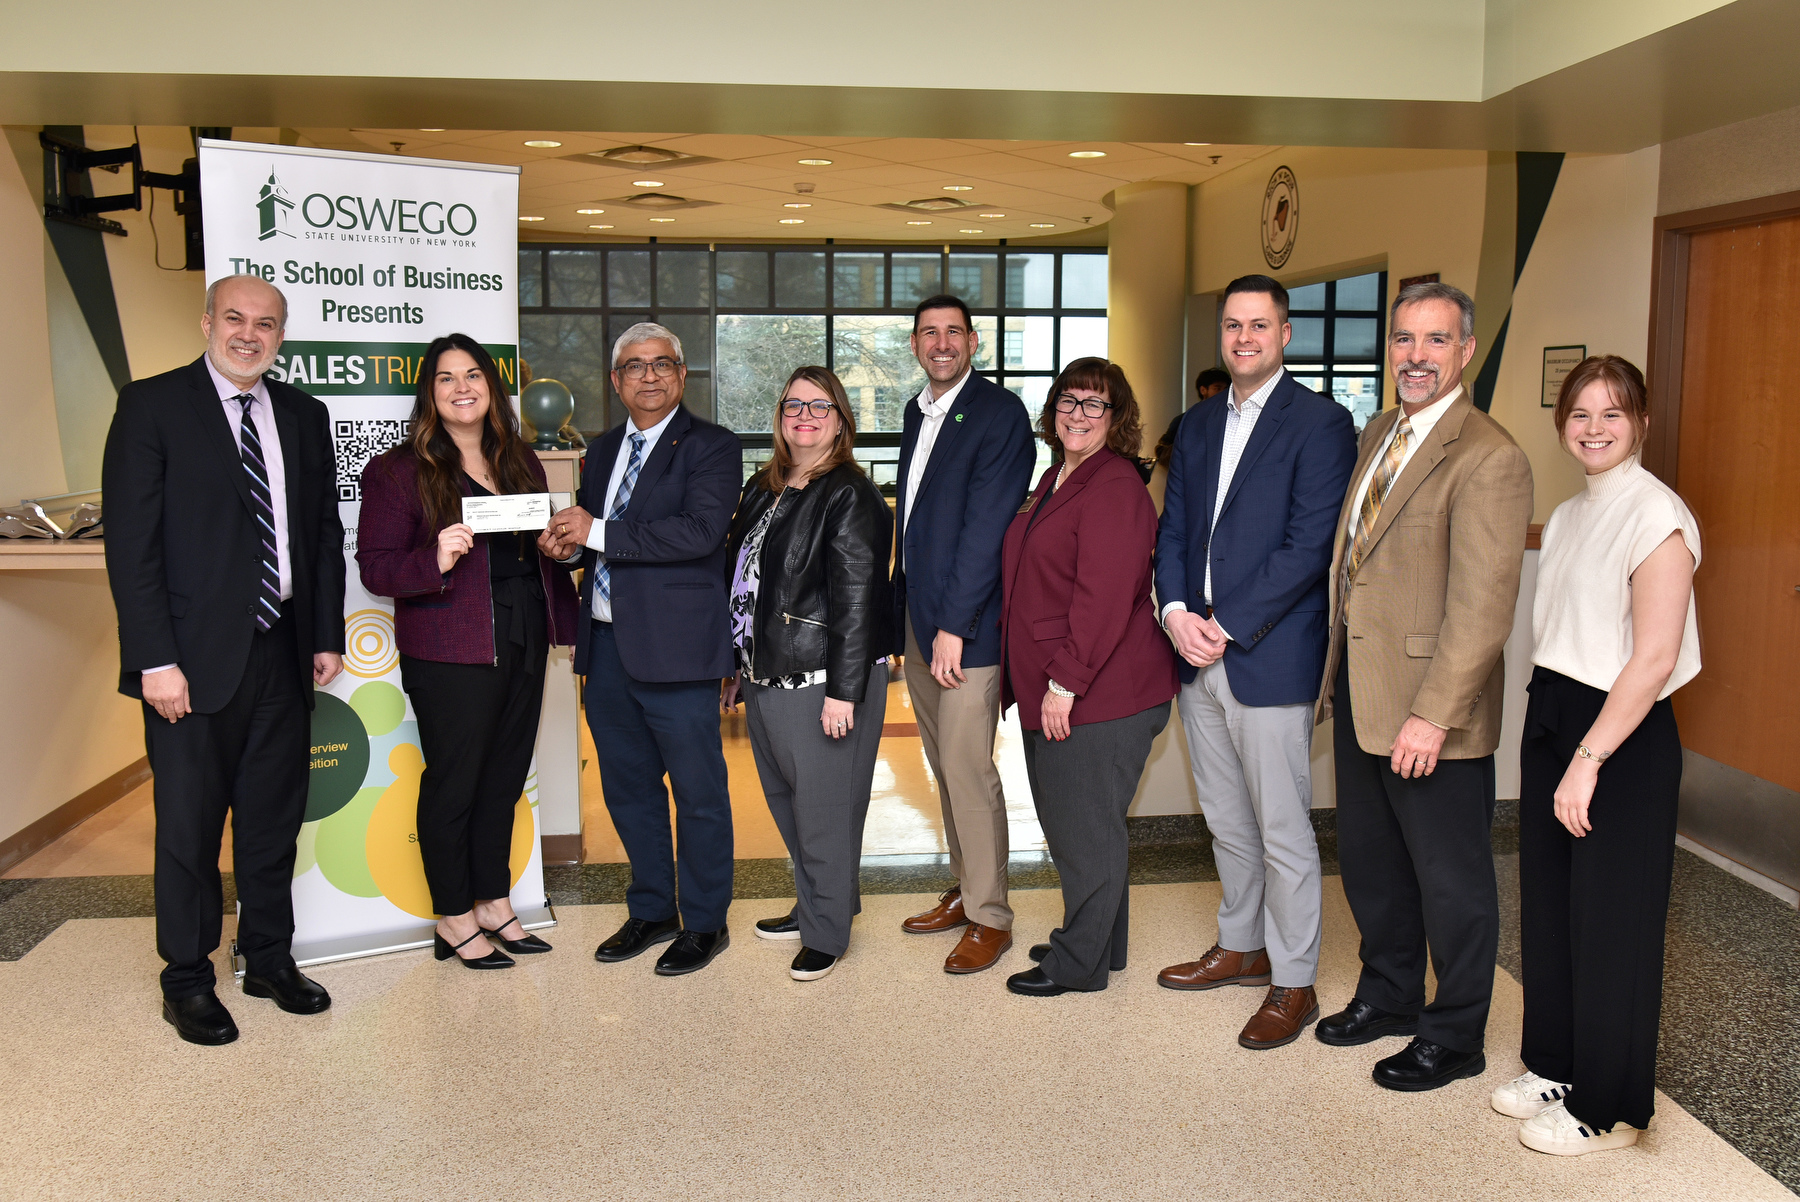 Enterprise Mobility presented their generous annual donation to SUNY Oswego Office of Career Services, with SUNY Oswego faculty and staff thanking them for the support.